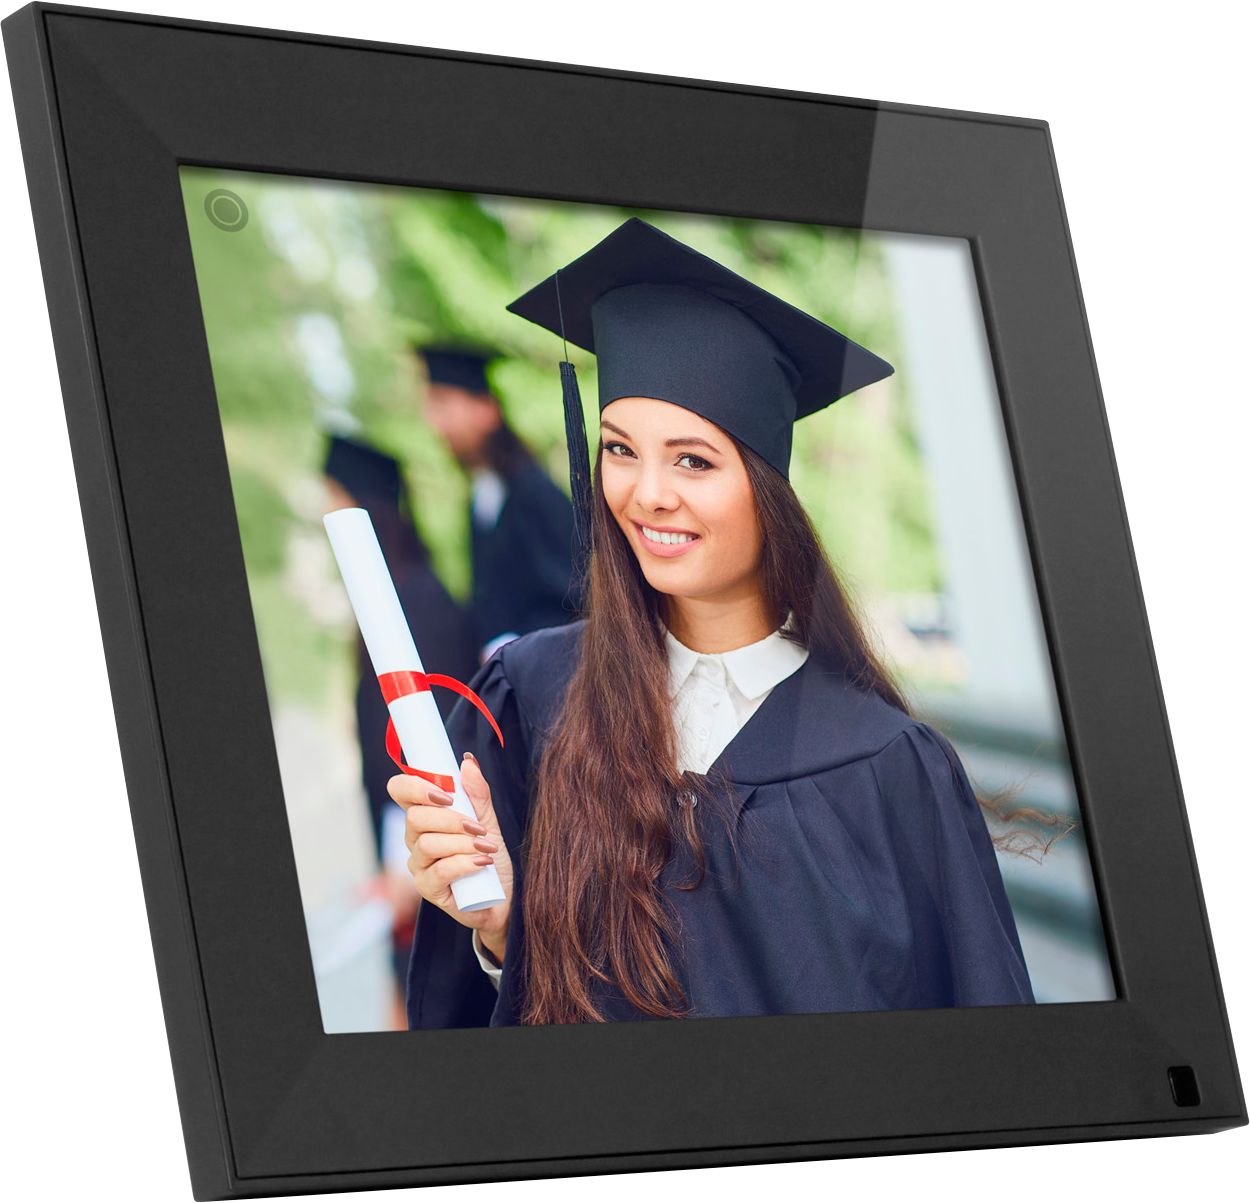 Angle View: Aluratek - 9" WiFi Touchscreen IPS LCD Display Digital Photo Frame with Motion Sensor and 16GB Built-in Memory - Black